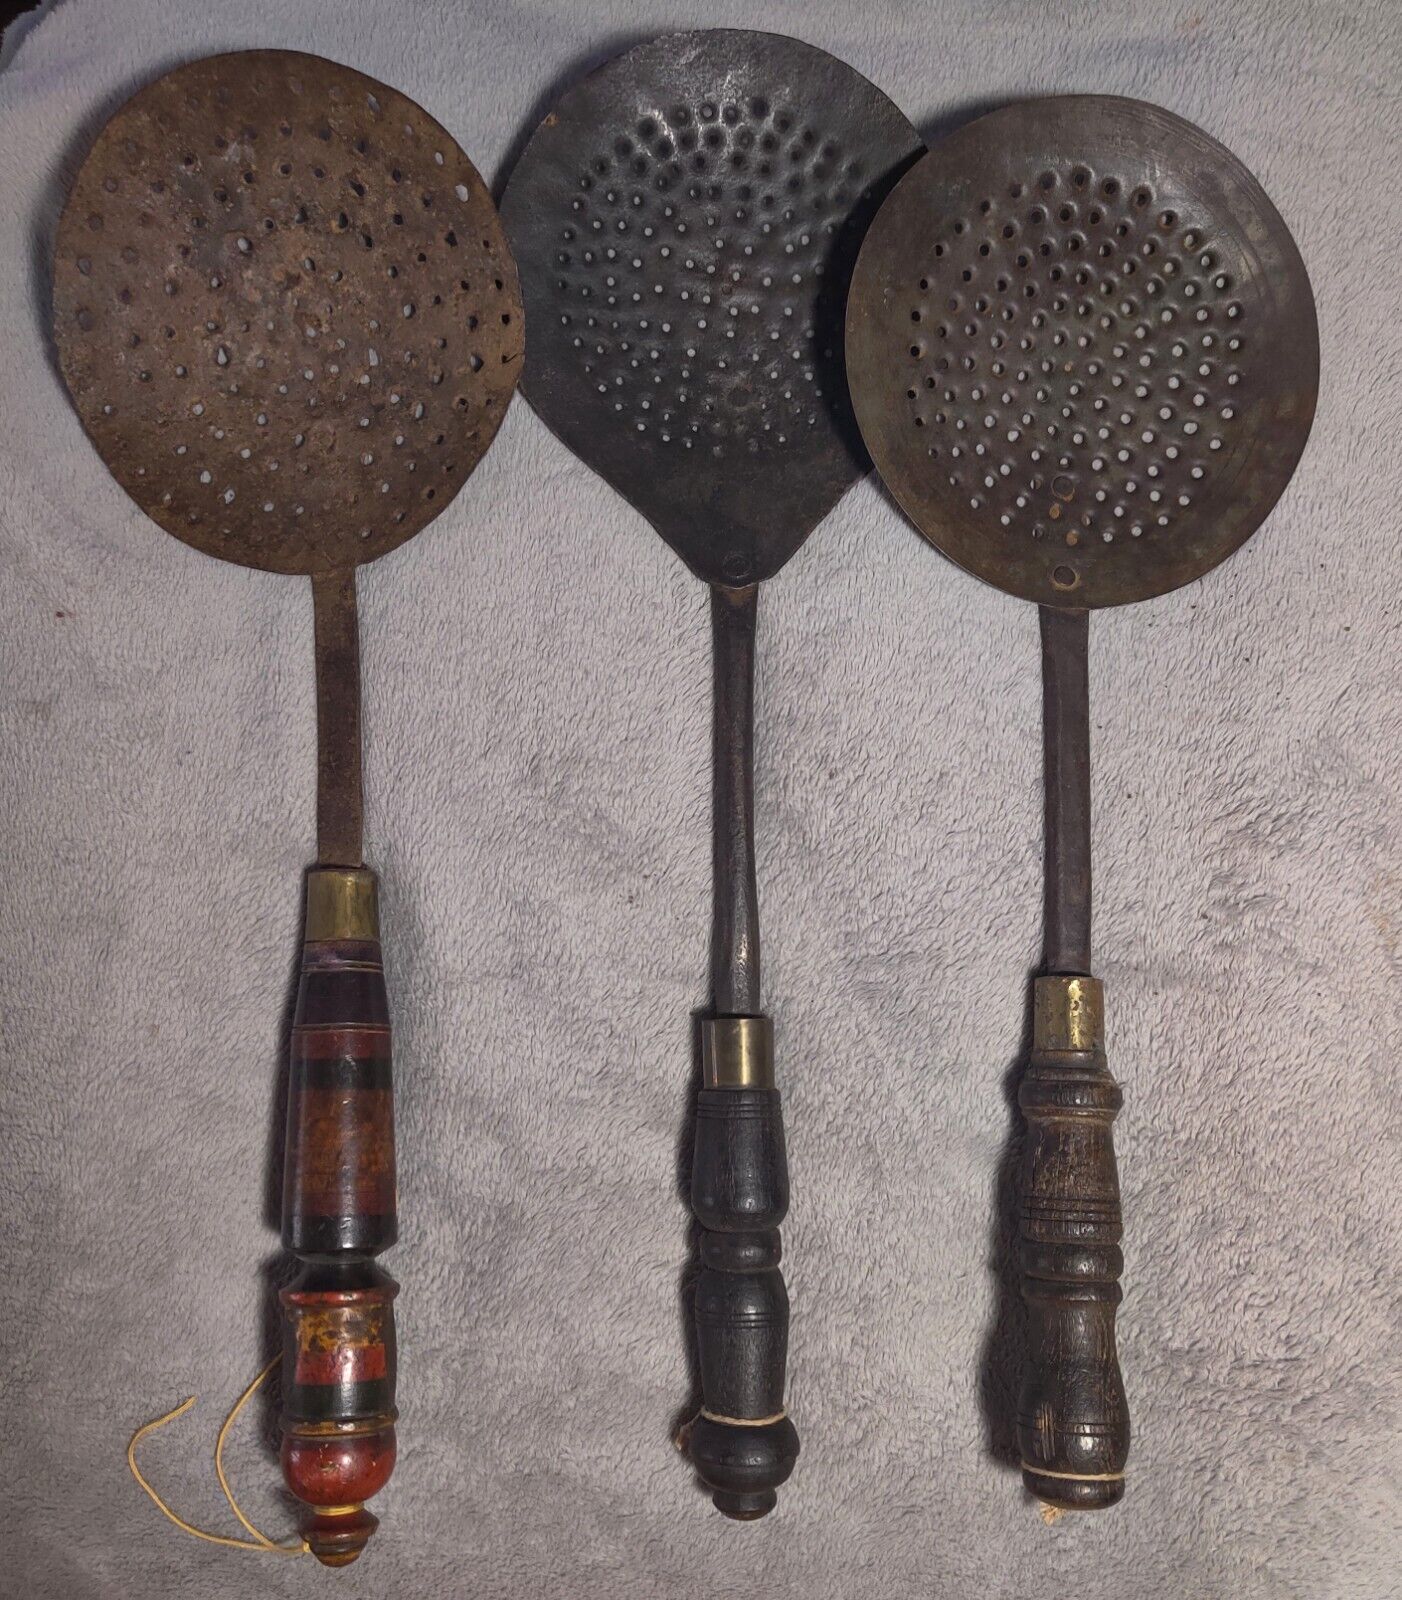 Three Vintage Chinese Cooking Strainers - Metal with Wood Handles - Primitive 